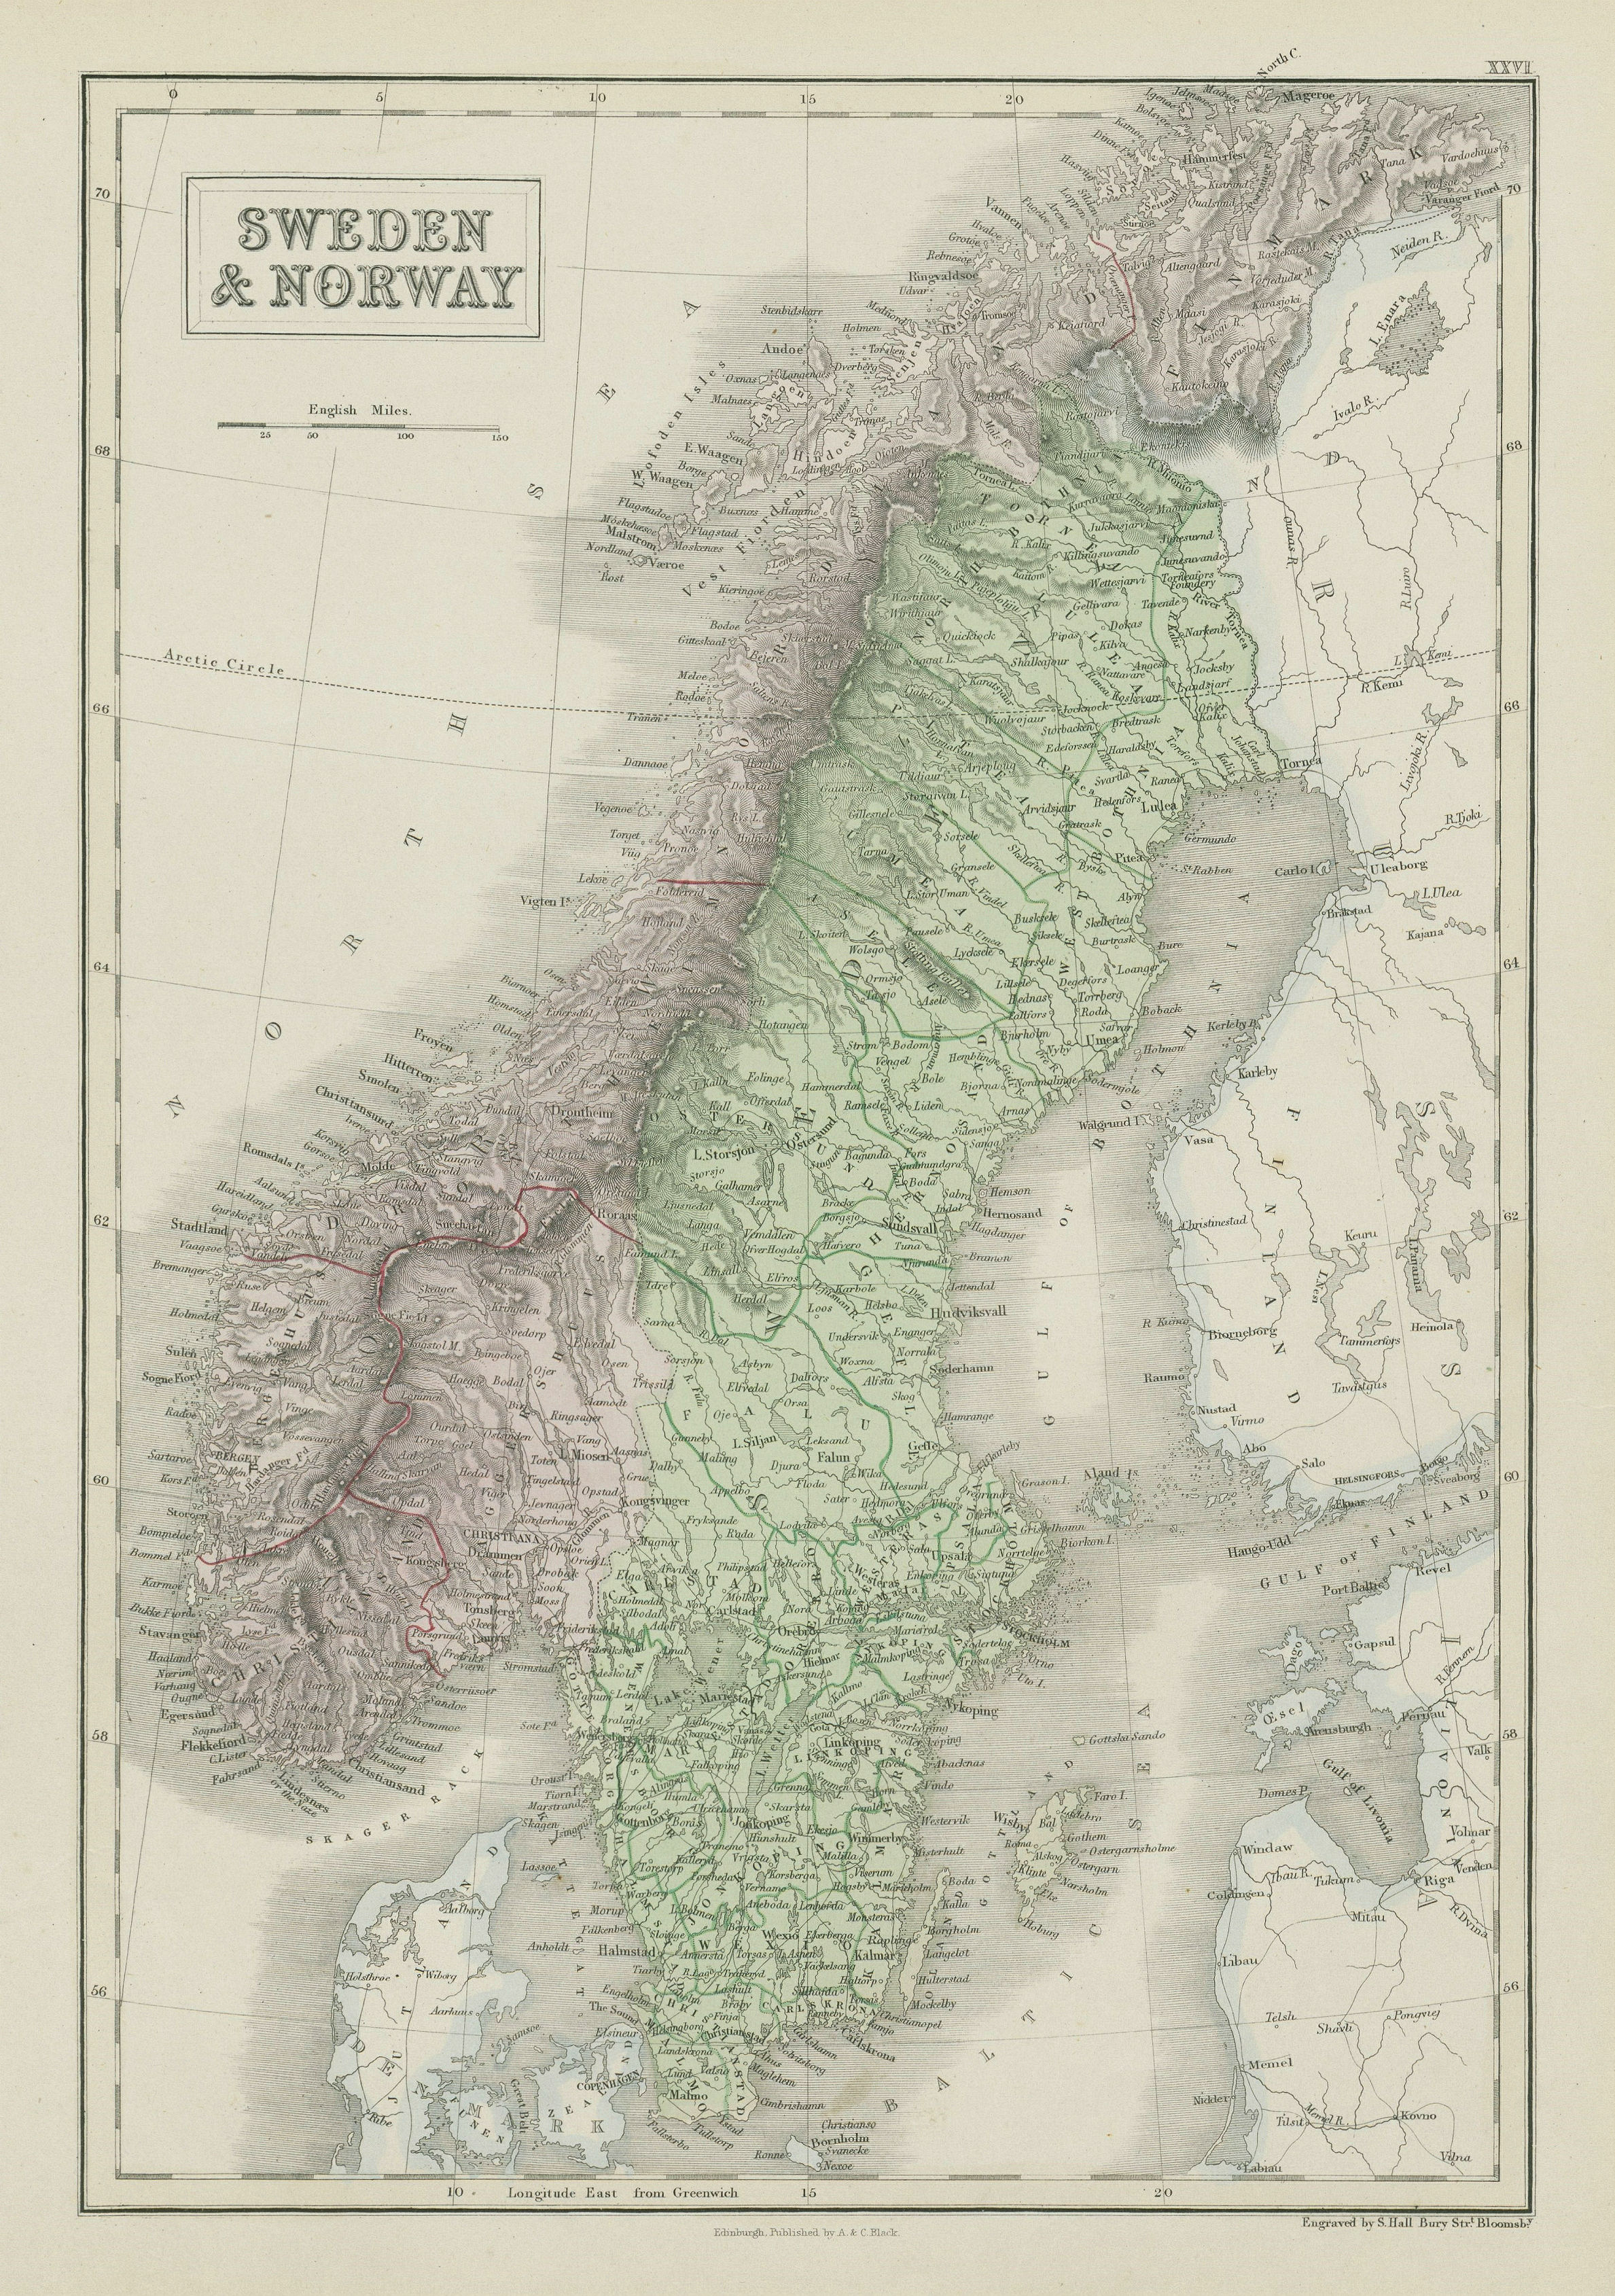 Associate Product Sweden & Norway. Scandinavia showing provinces. SIDNEY HALL 1856 old map